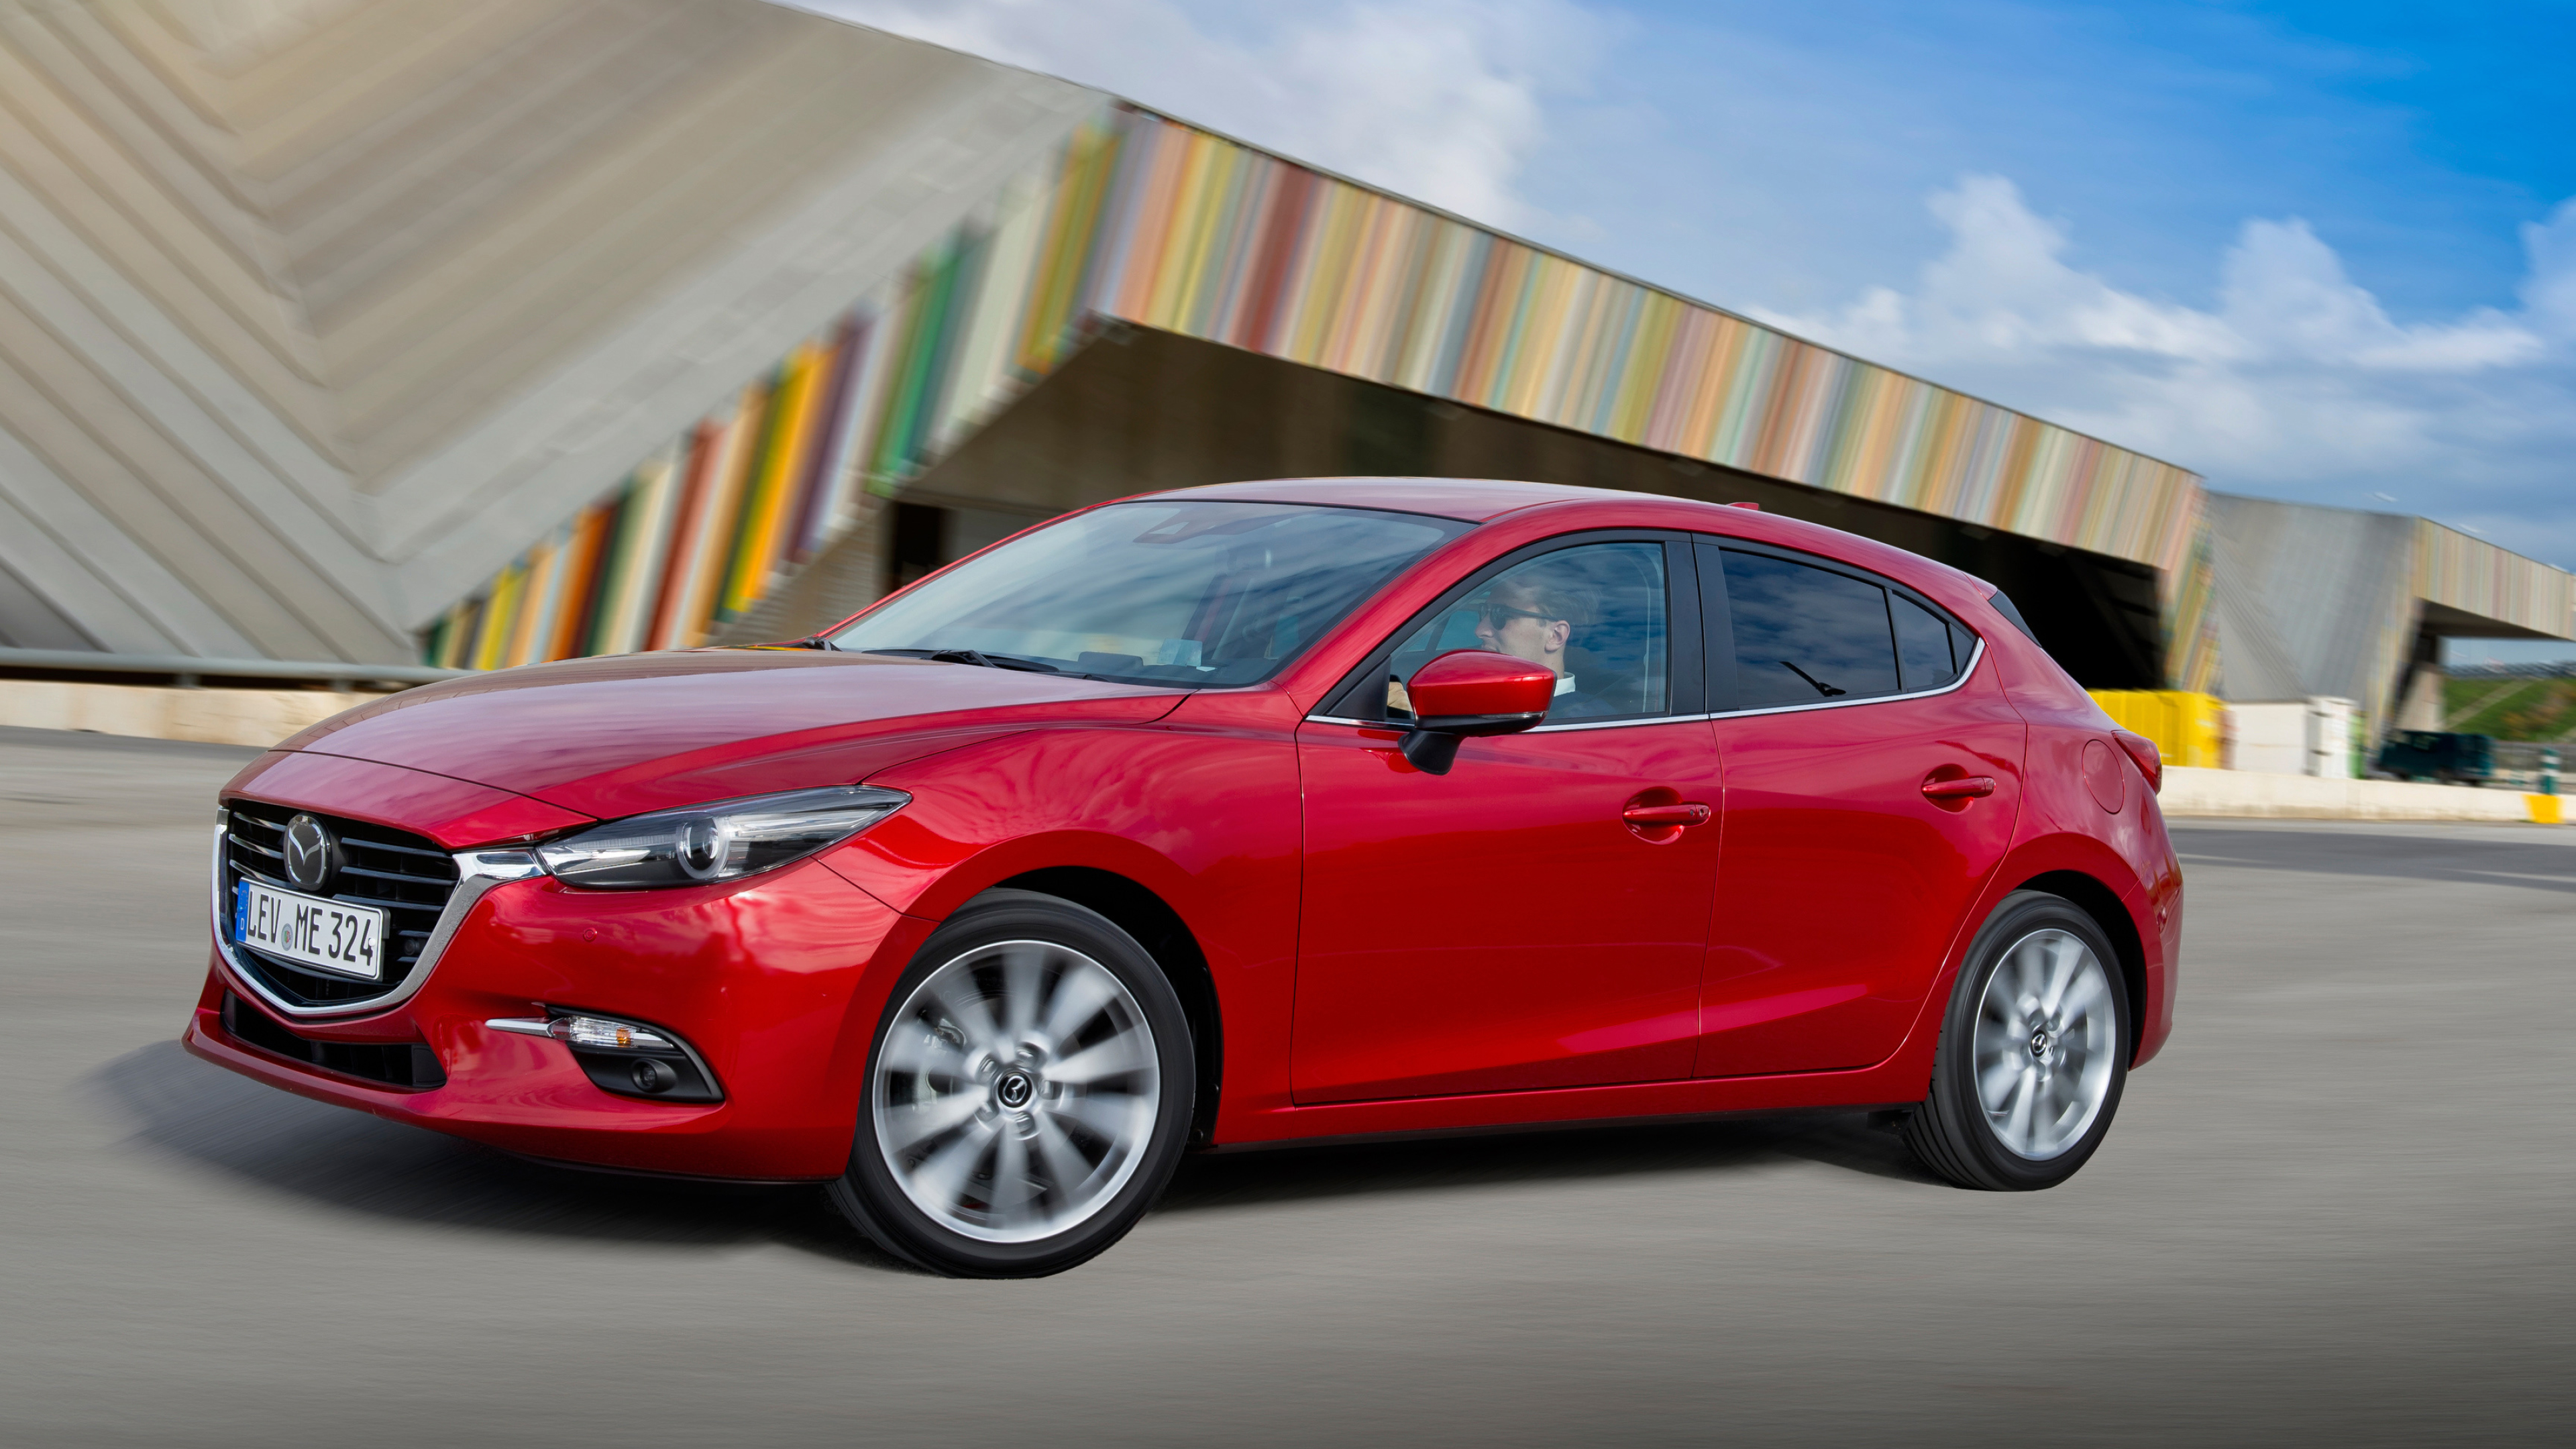 Mazda 3, Stunning 4K wallpapers, Exquisite and stylish, Incomparable driving pleasure, 3840x2160 4K Desktop